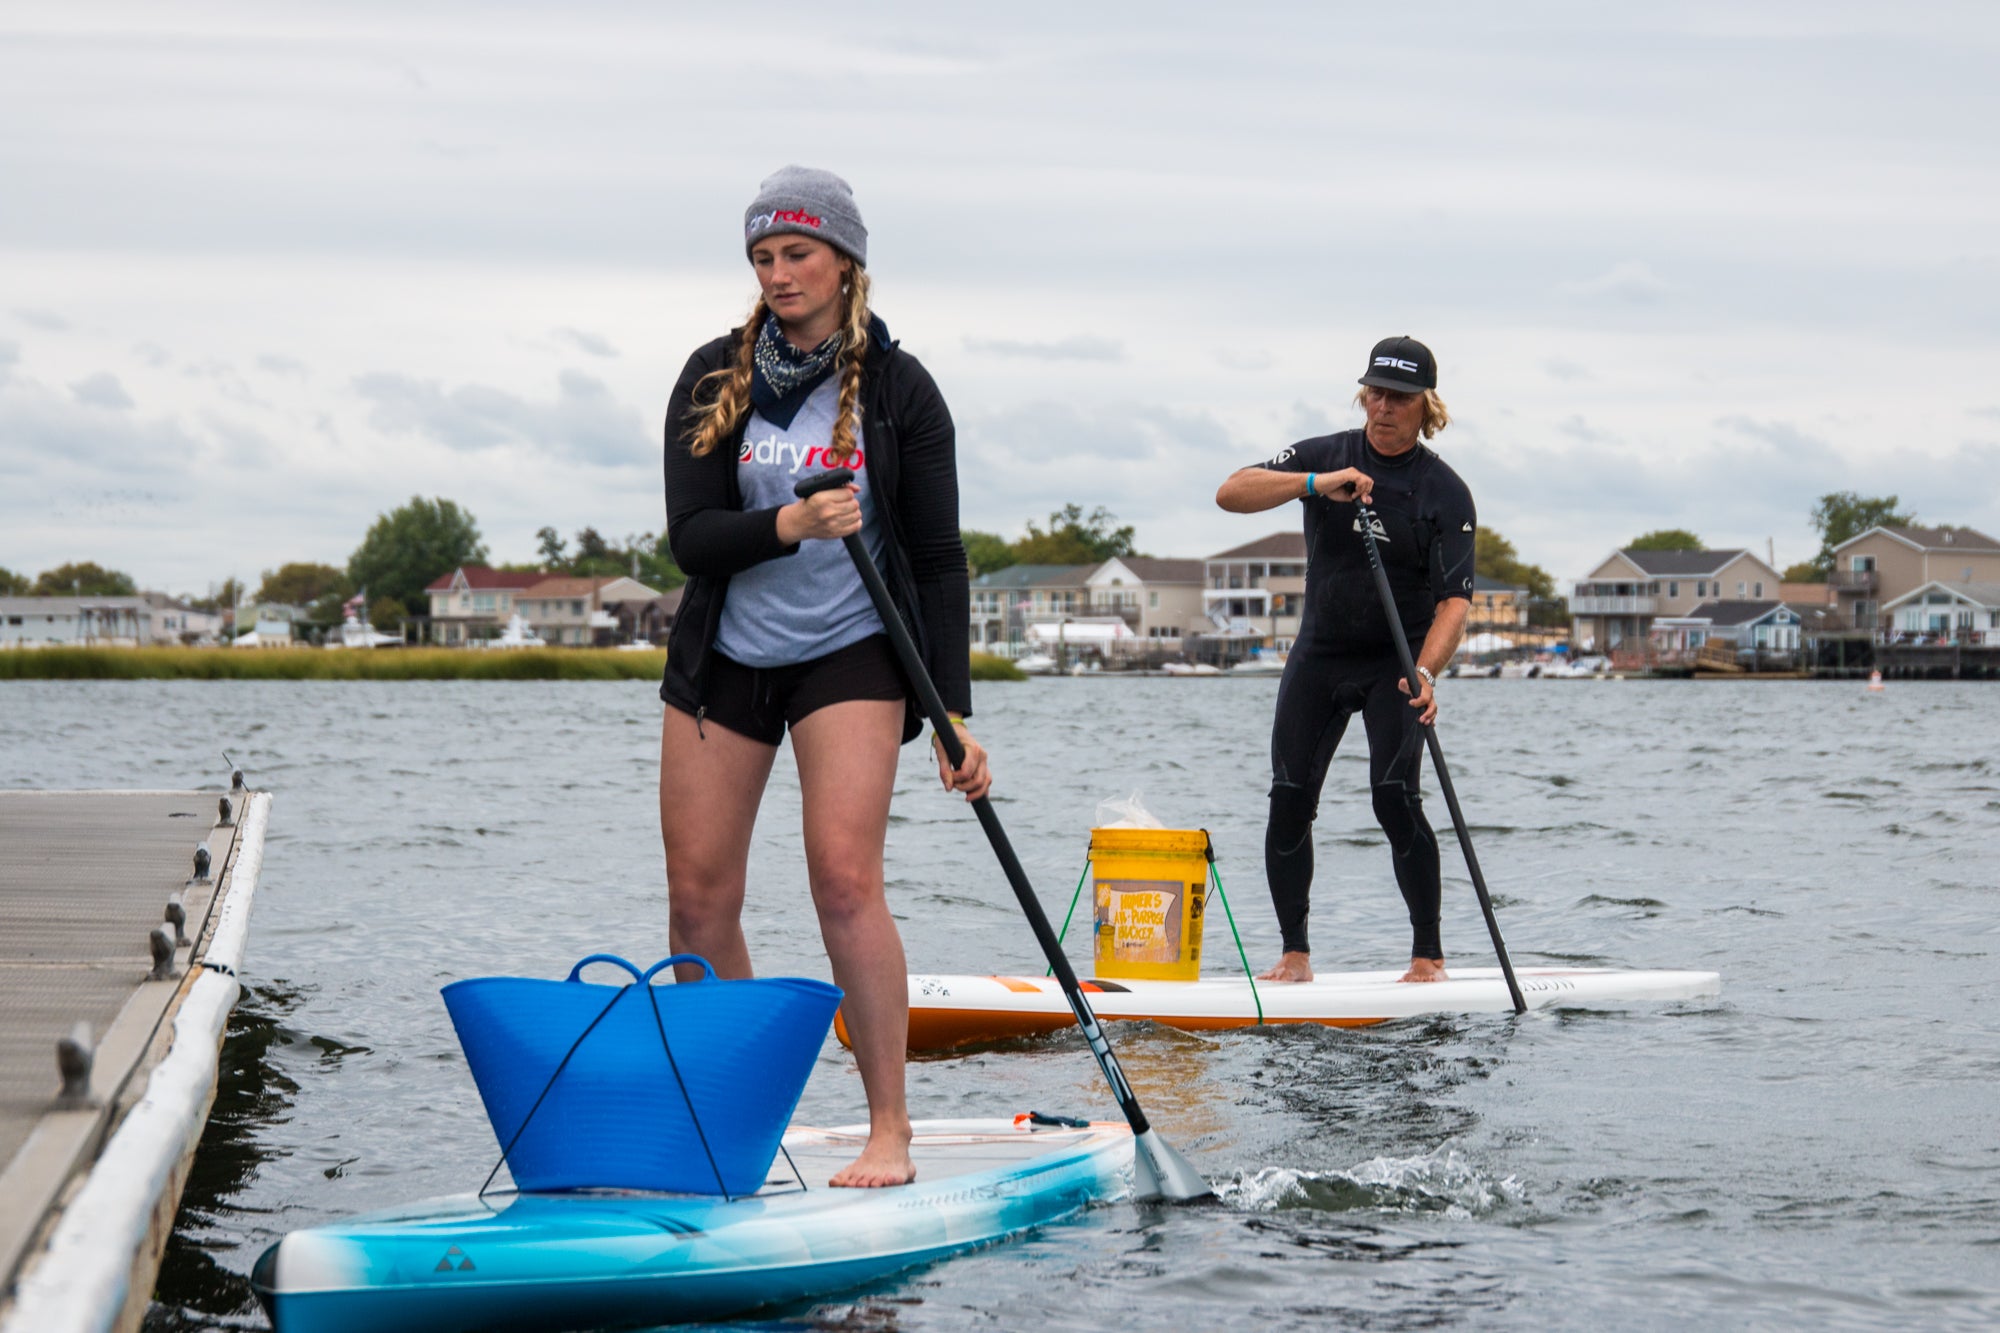 Cal Major waterway clean up at the 2019 NY SUP Open 